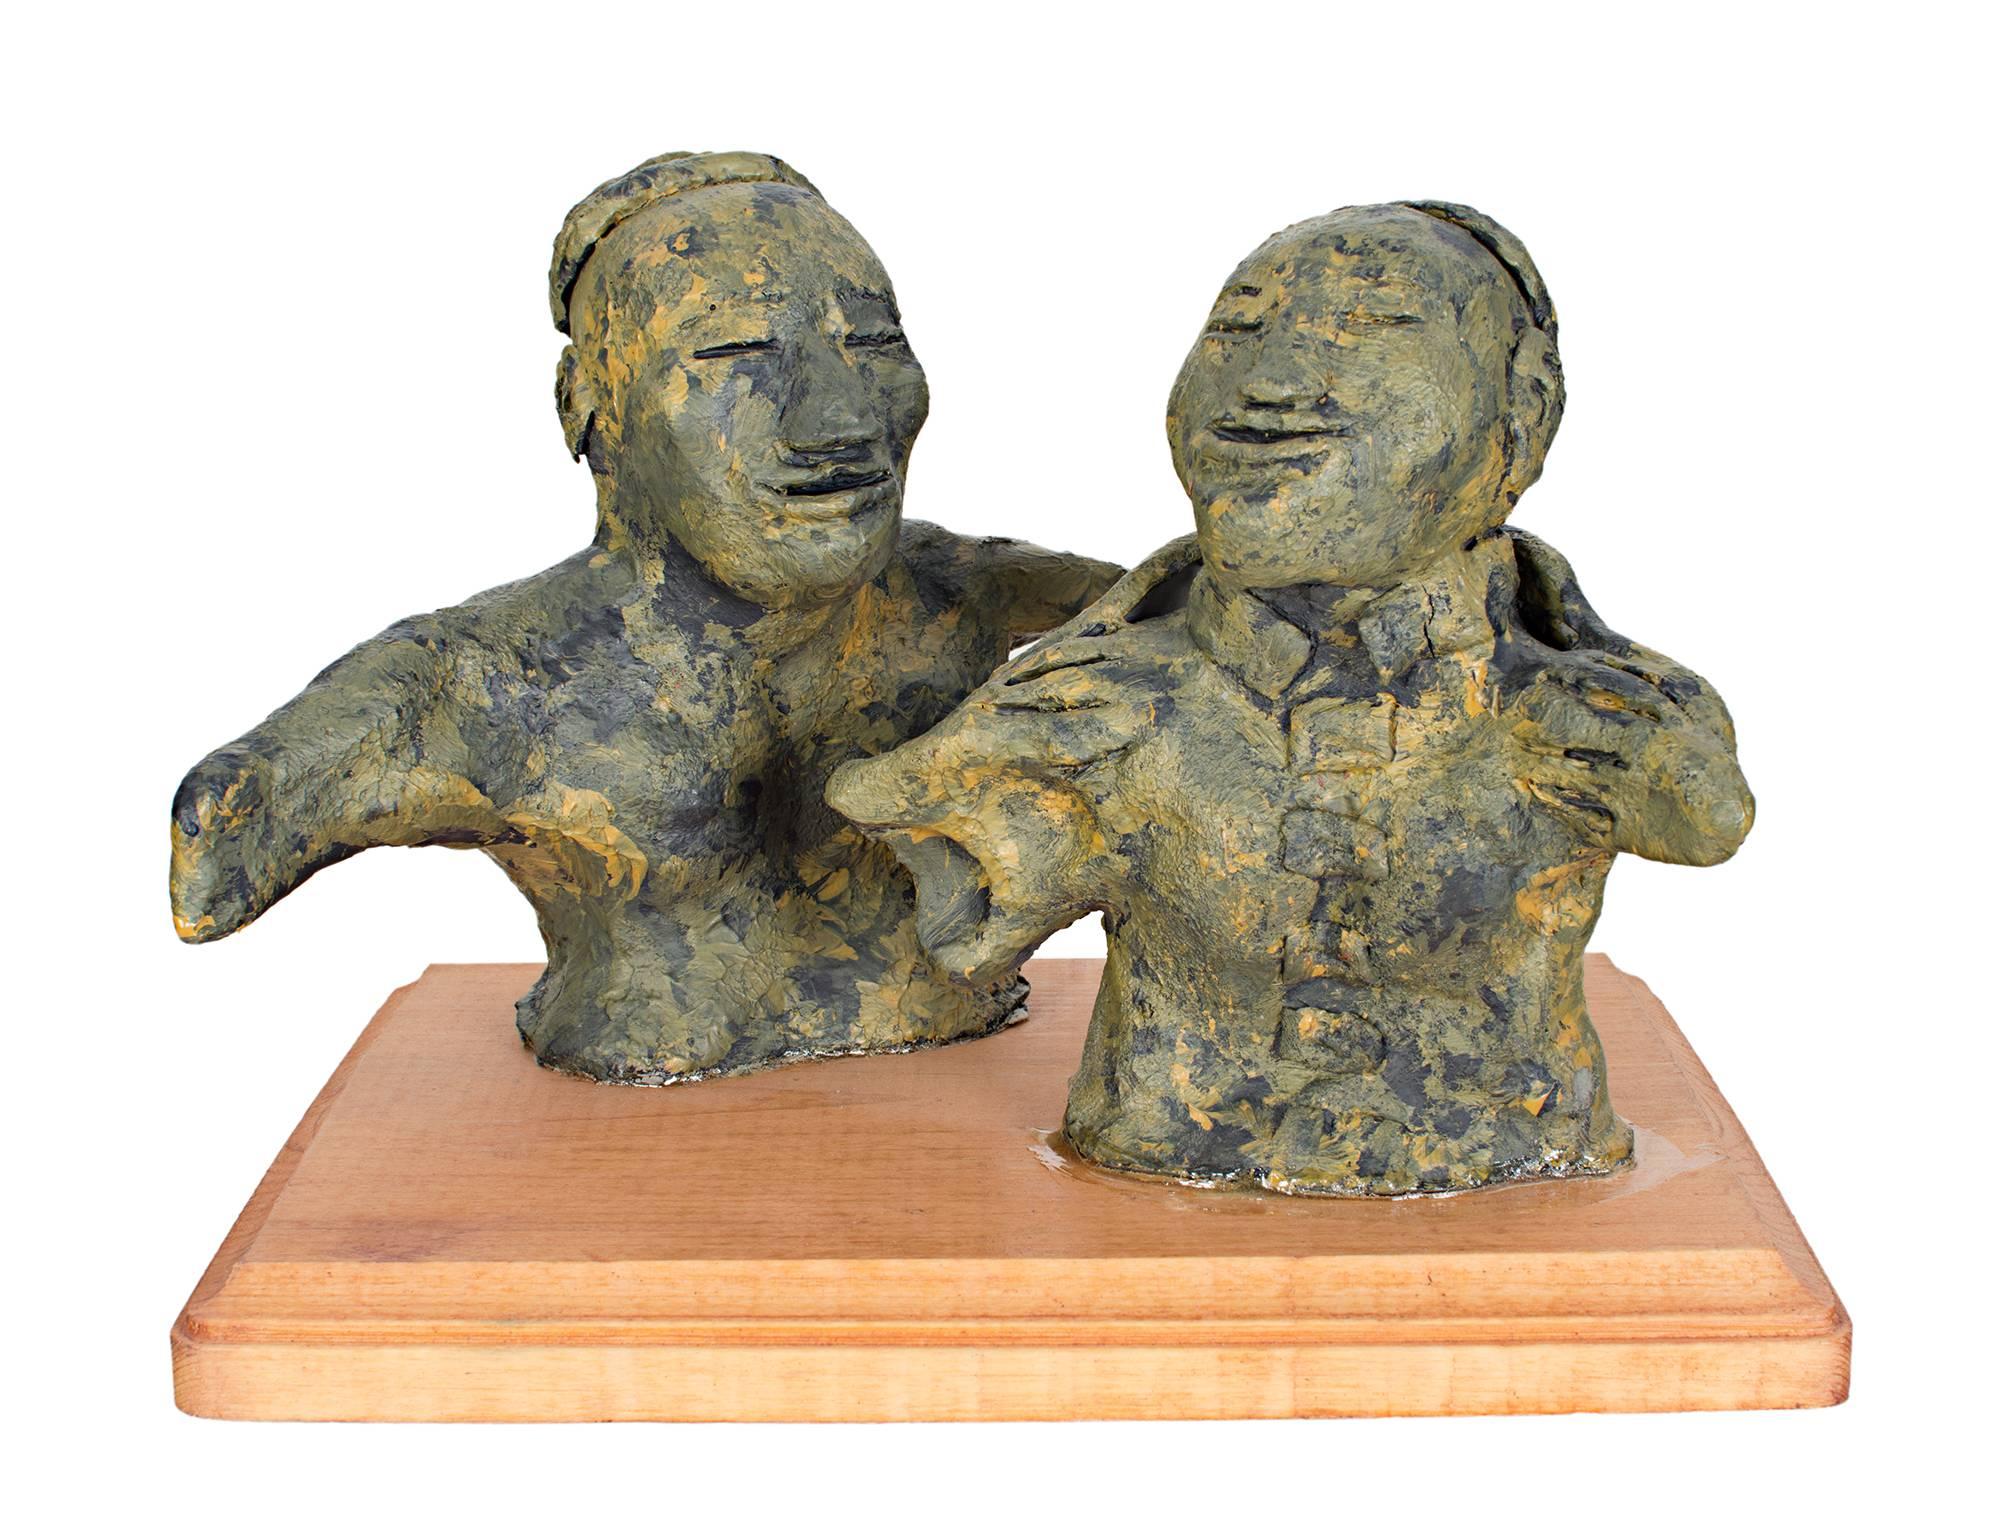 "Epoxy Glued Ming Dynasty" is an original acrylic-painted clay sculpture by Reginald K. Gee. The artist signed the piece on the bottom. This sculpture depicts two Asian men without arms. 

6 1/2" x 9" x 7" art

Reginald K. Gee was born in Milwaukee